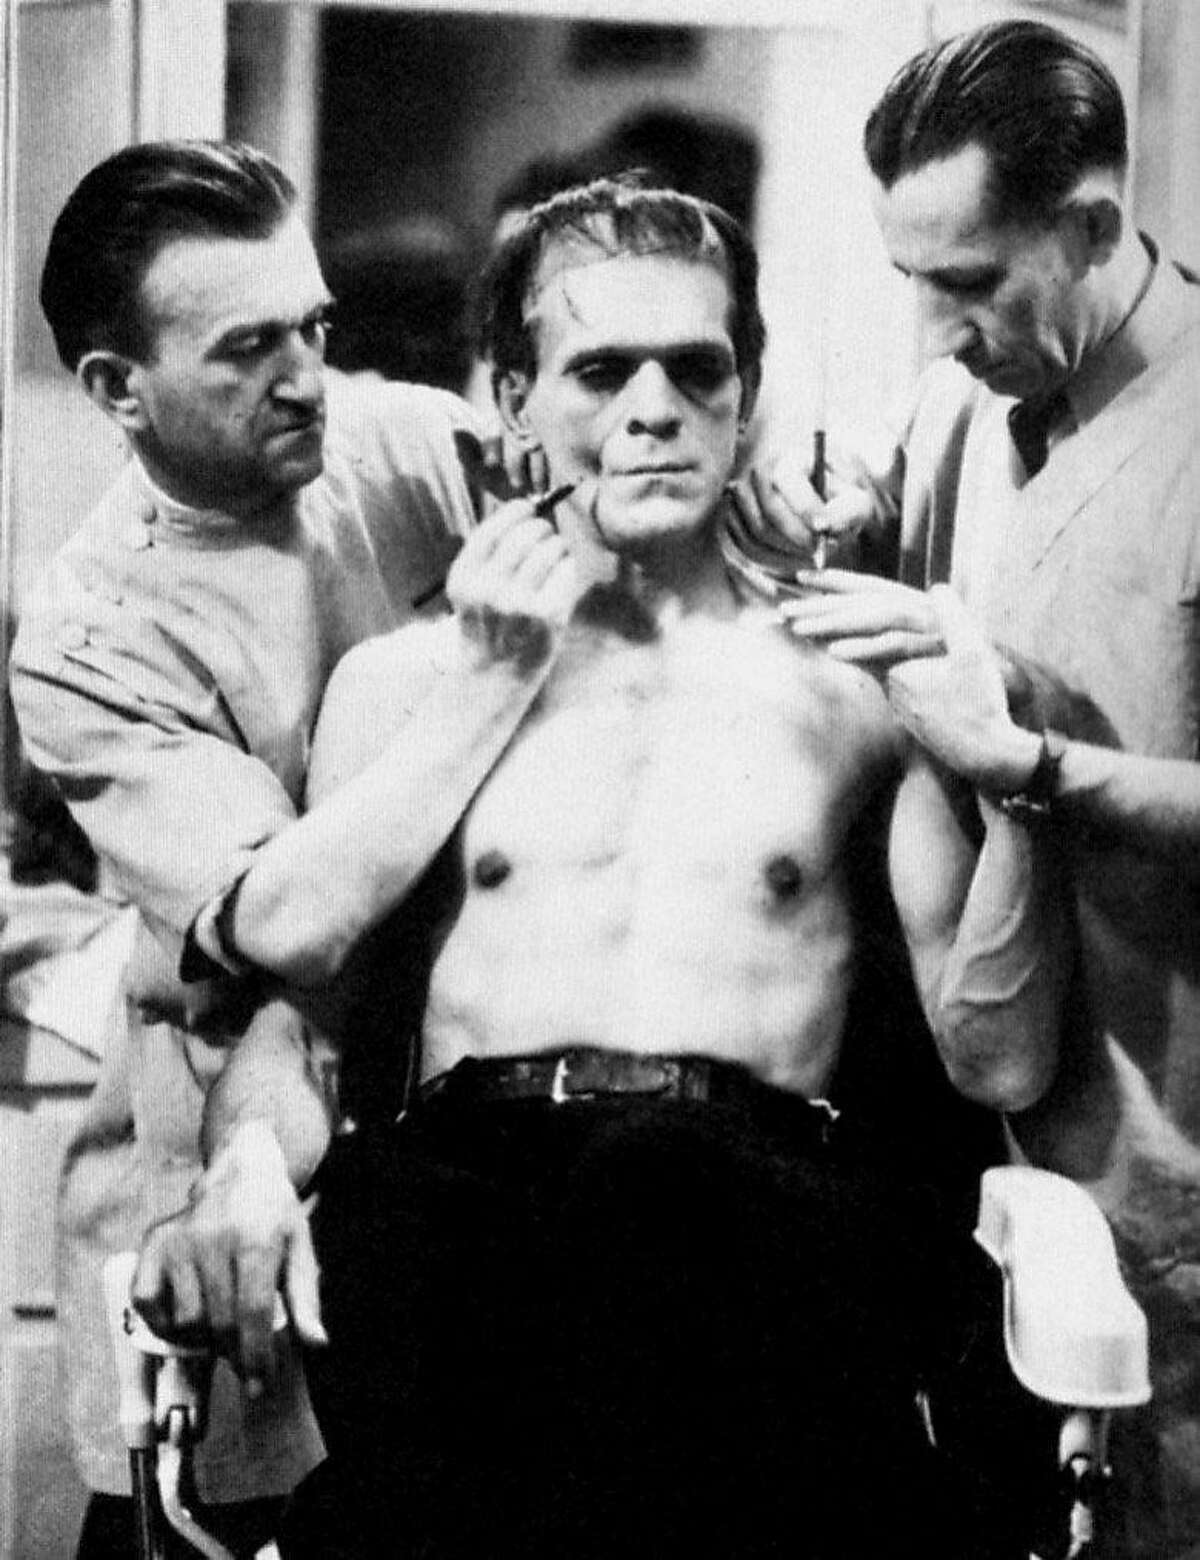 Hi, for karloff28 in Pink 5/28, need the following picture of Boris Karloff, center, being made up as Frankenstein's monster by makeup man Jack Pierce, left (guy at right is not identified).Ê Please slug it Karloff28_frankenstein. Ran on: 05-28-2006 The Balboa series will include footage of Boris Karloff, center, being made up as Franken- stein's monster by Jack Pierce, left.